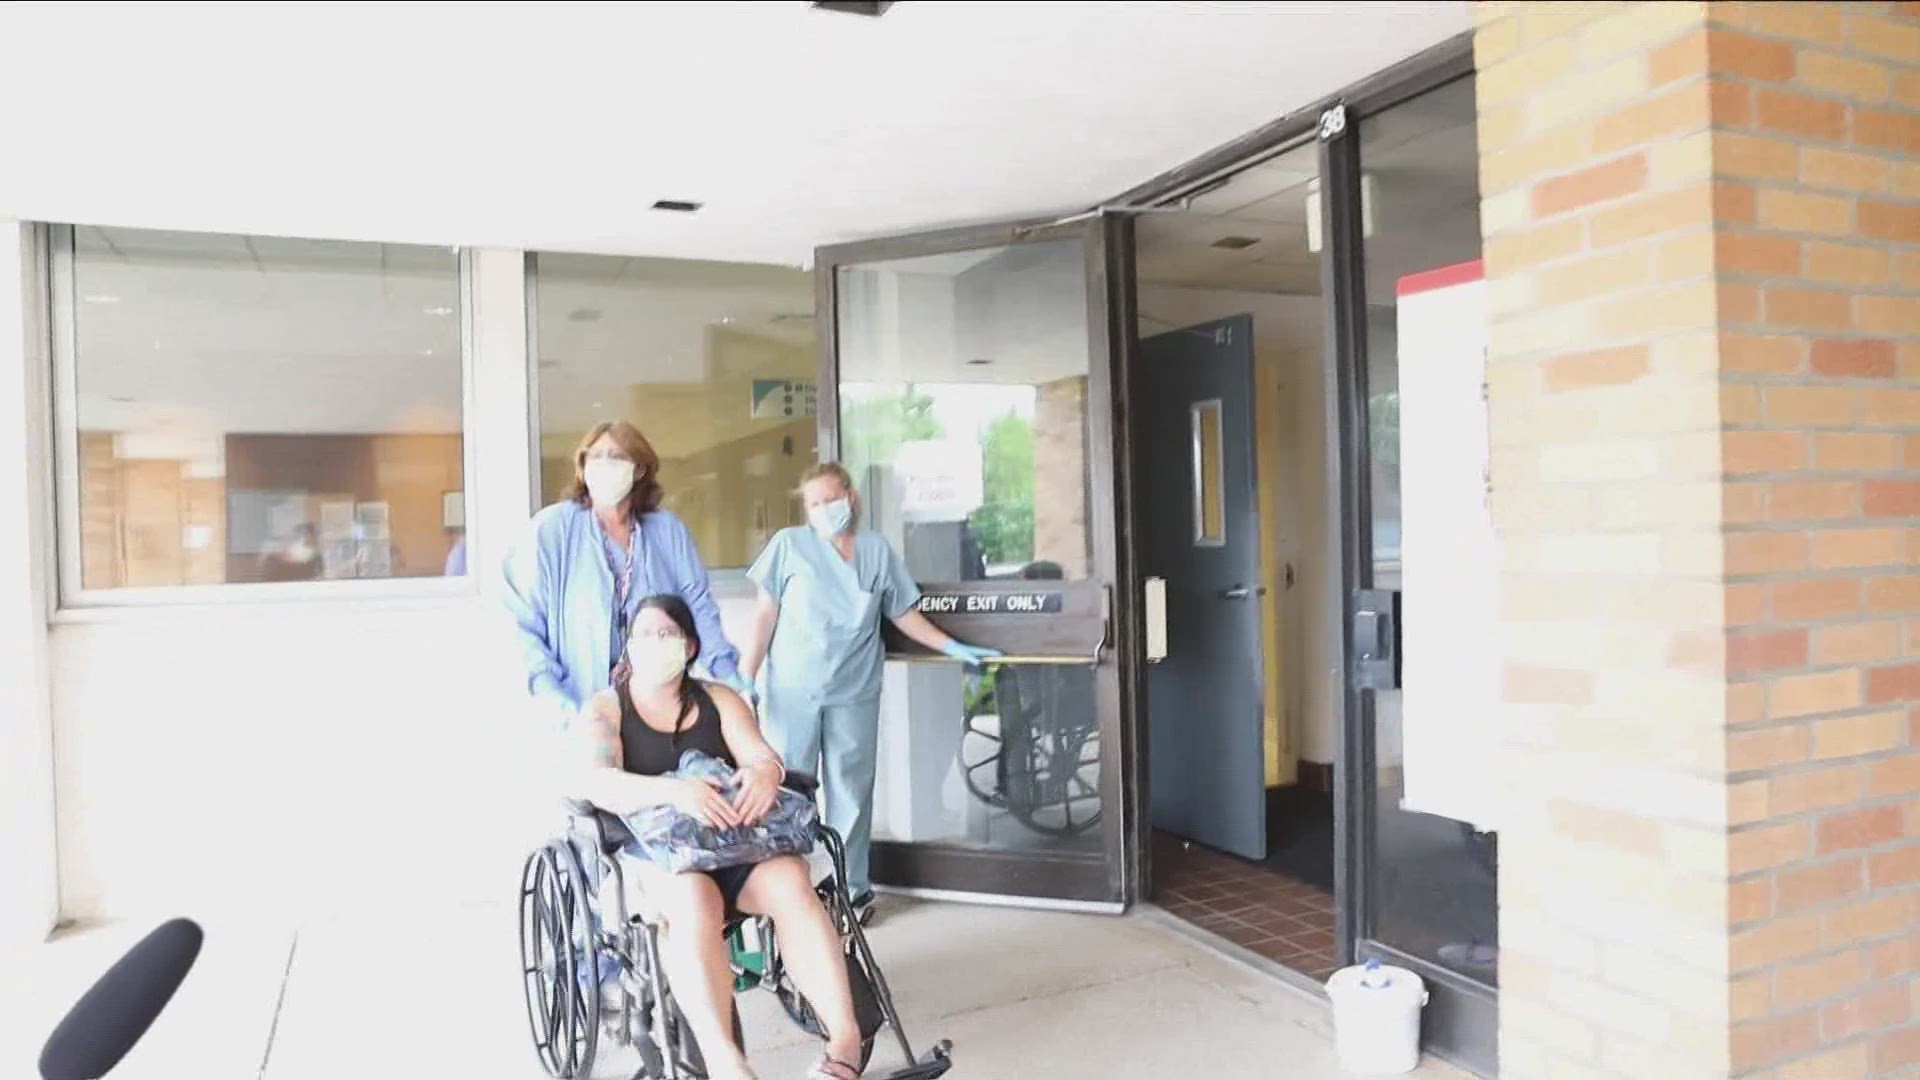 Catholic Health shared this video with us of Suzanna Anderson from Sloan, its 500th patient being discharged from the St. Joseph Campus.